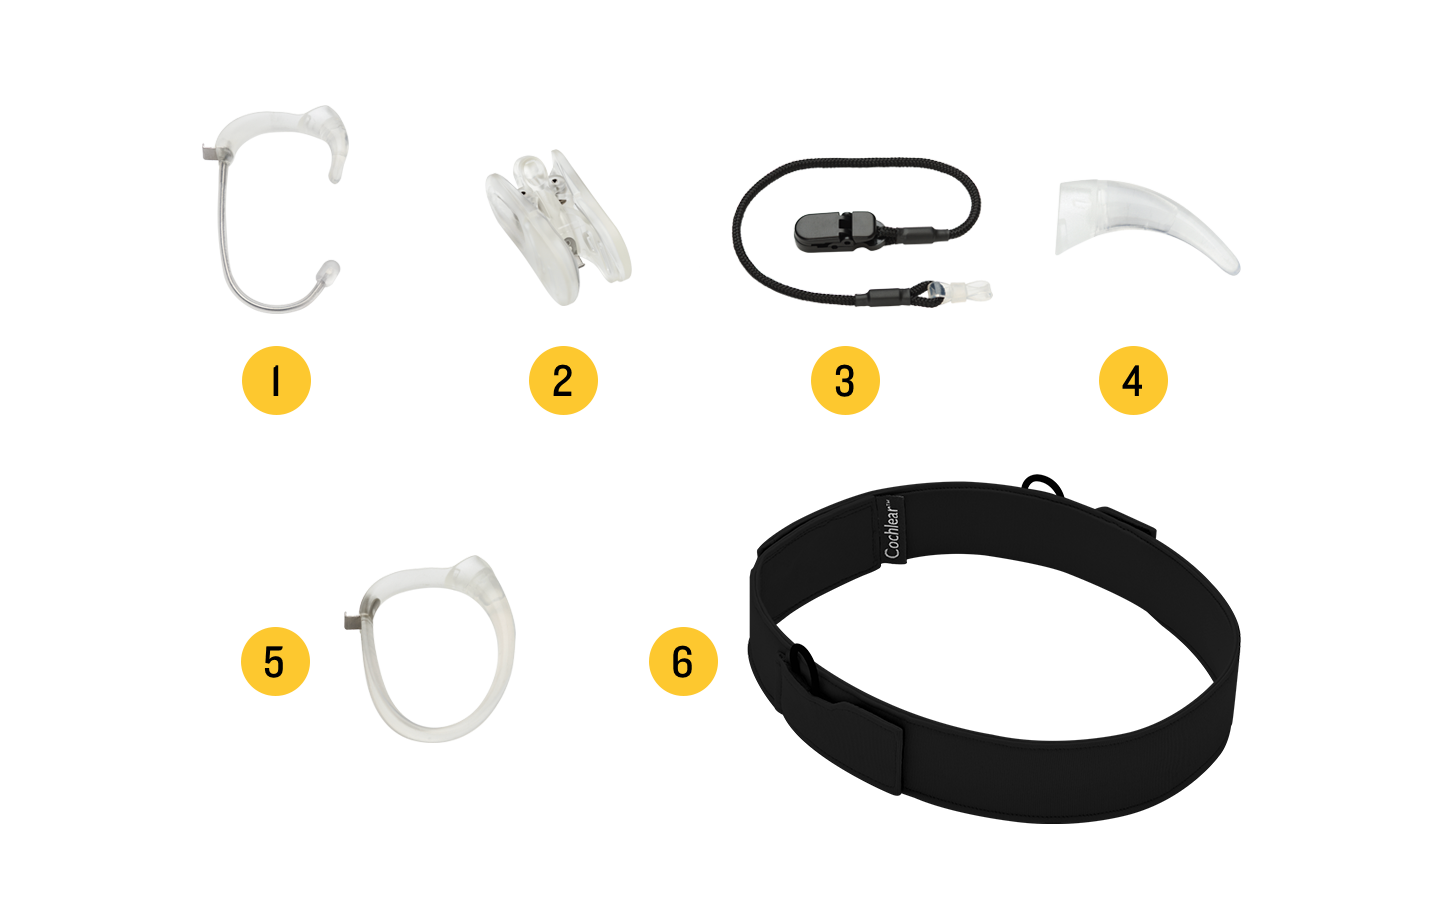 Image of the accessories for the Nucleus 7 Sound Processor: 1. Snugfit, 2. Koala Clip, 3. Safety Cord, 4. Earhook